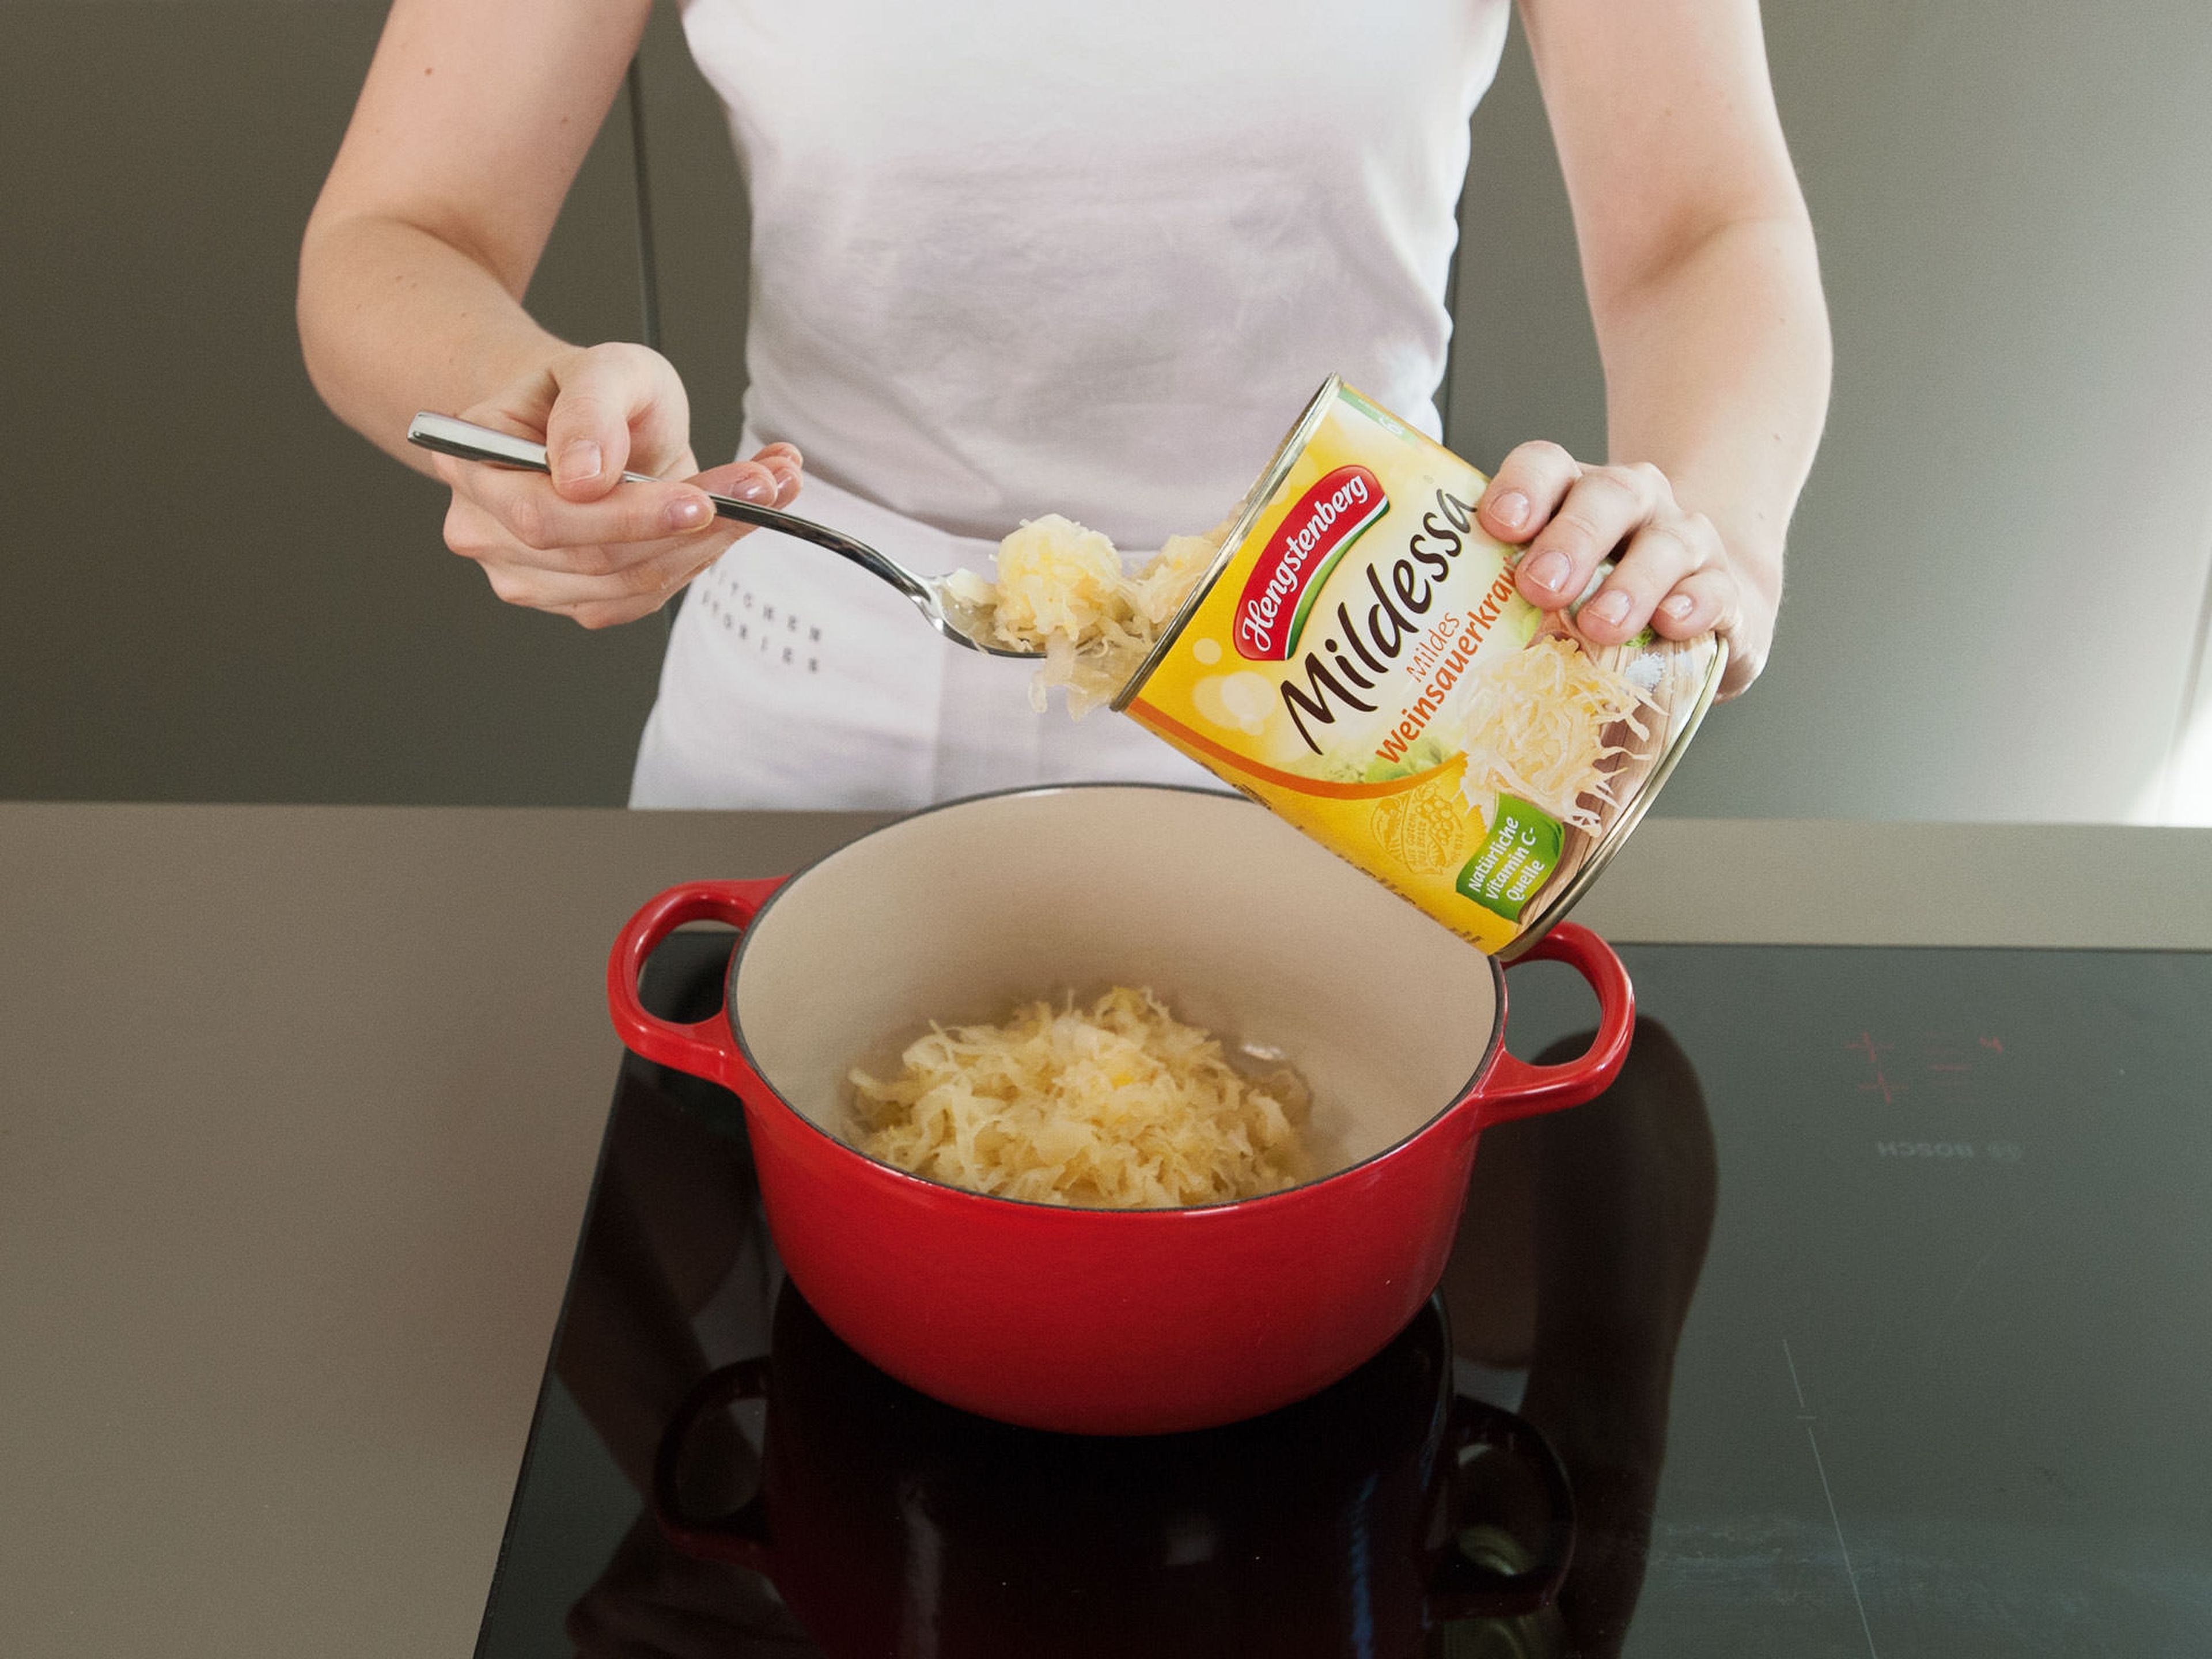 Heat up sauerkraut in a large saucepan over medium heat for approx. 5 – 10 min. Stir occasionally. Add some broth and mustard for more flavor, if desired. To serve, place rouladen on a plate and serve with sauce and sauerkraut. Enjoy!